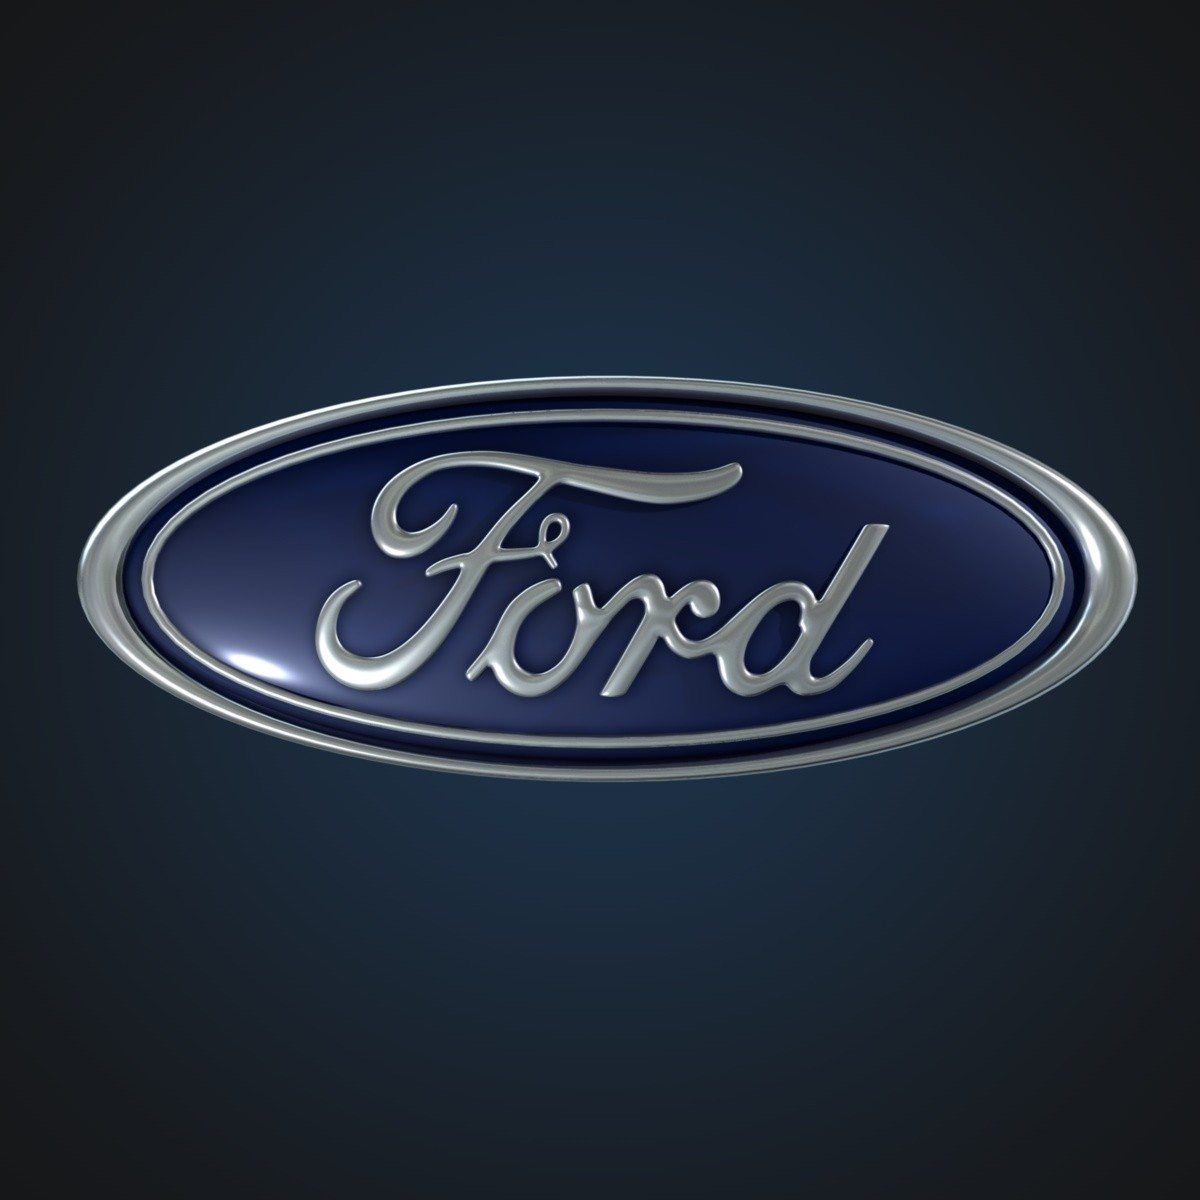 Ford Vehicles. All Cars & Trucks supported here.